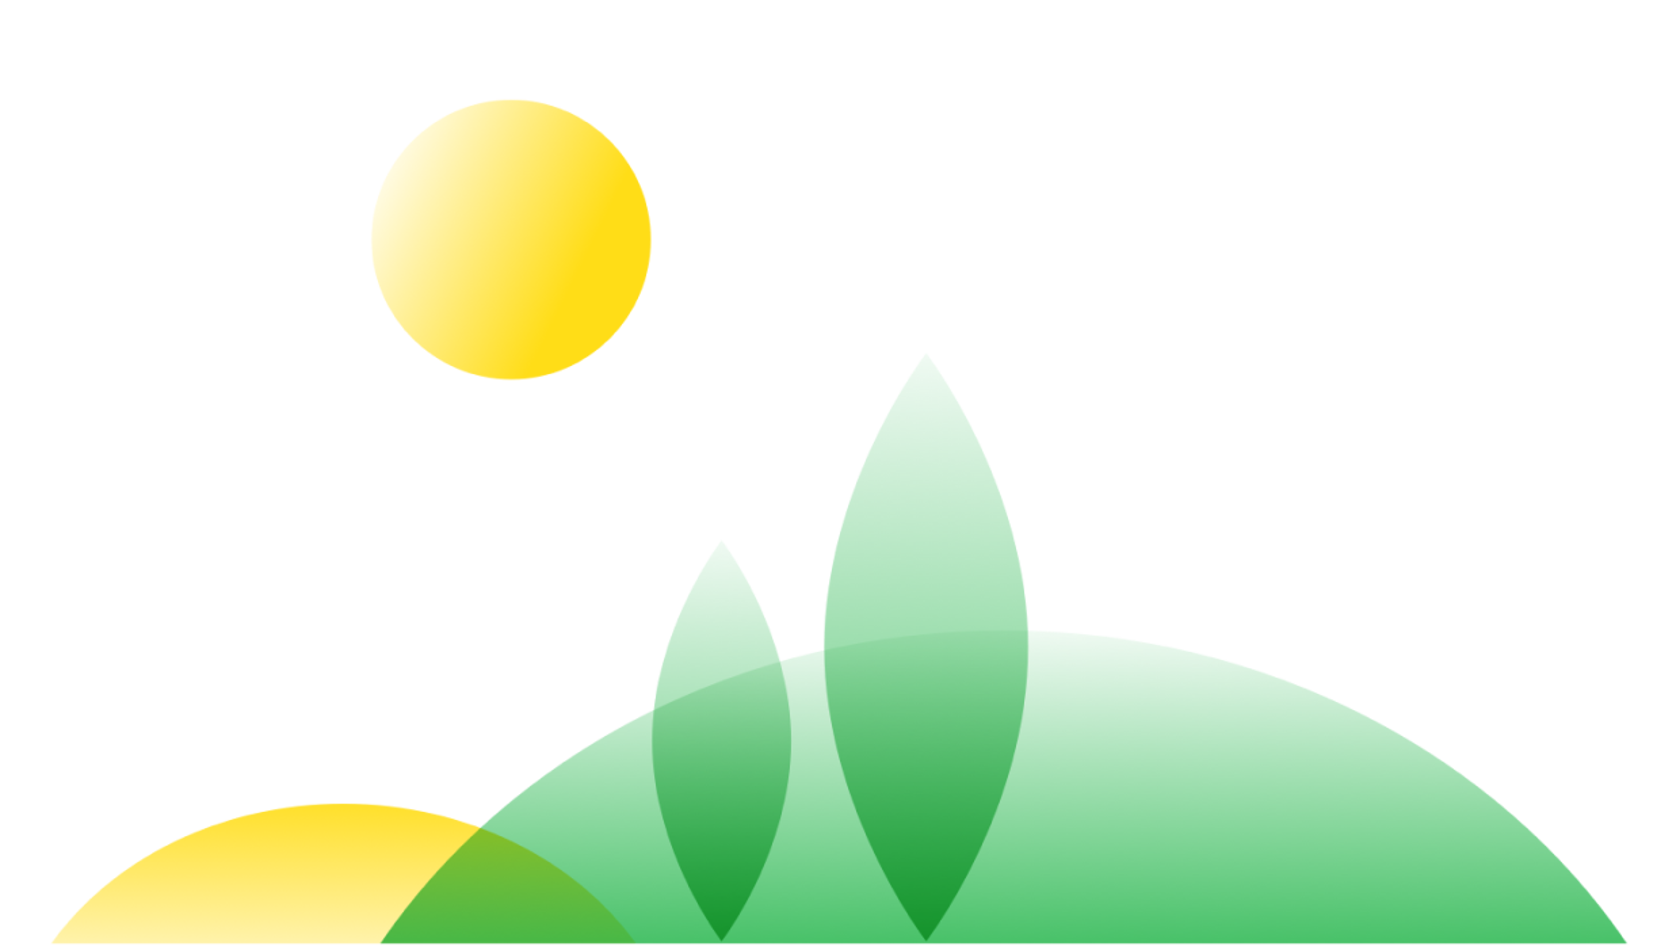 An illustration of hills, trees, sand and the sun.